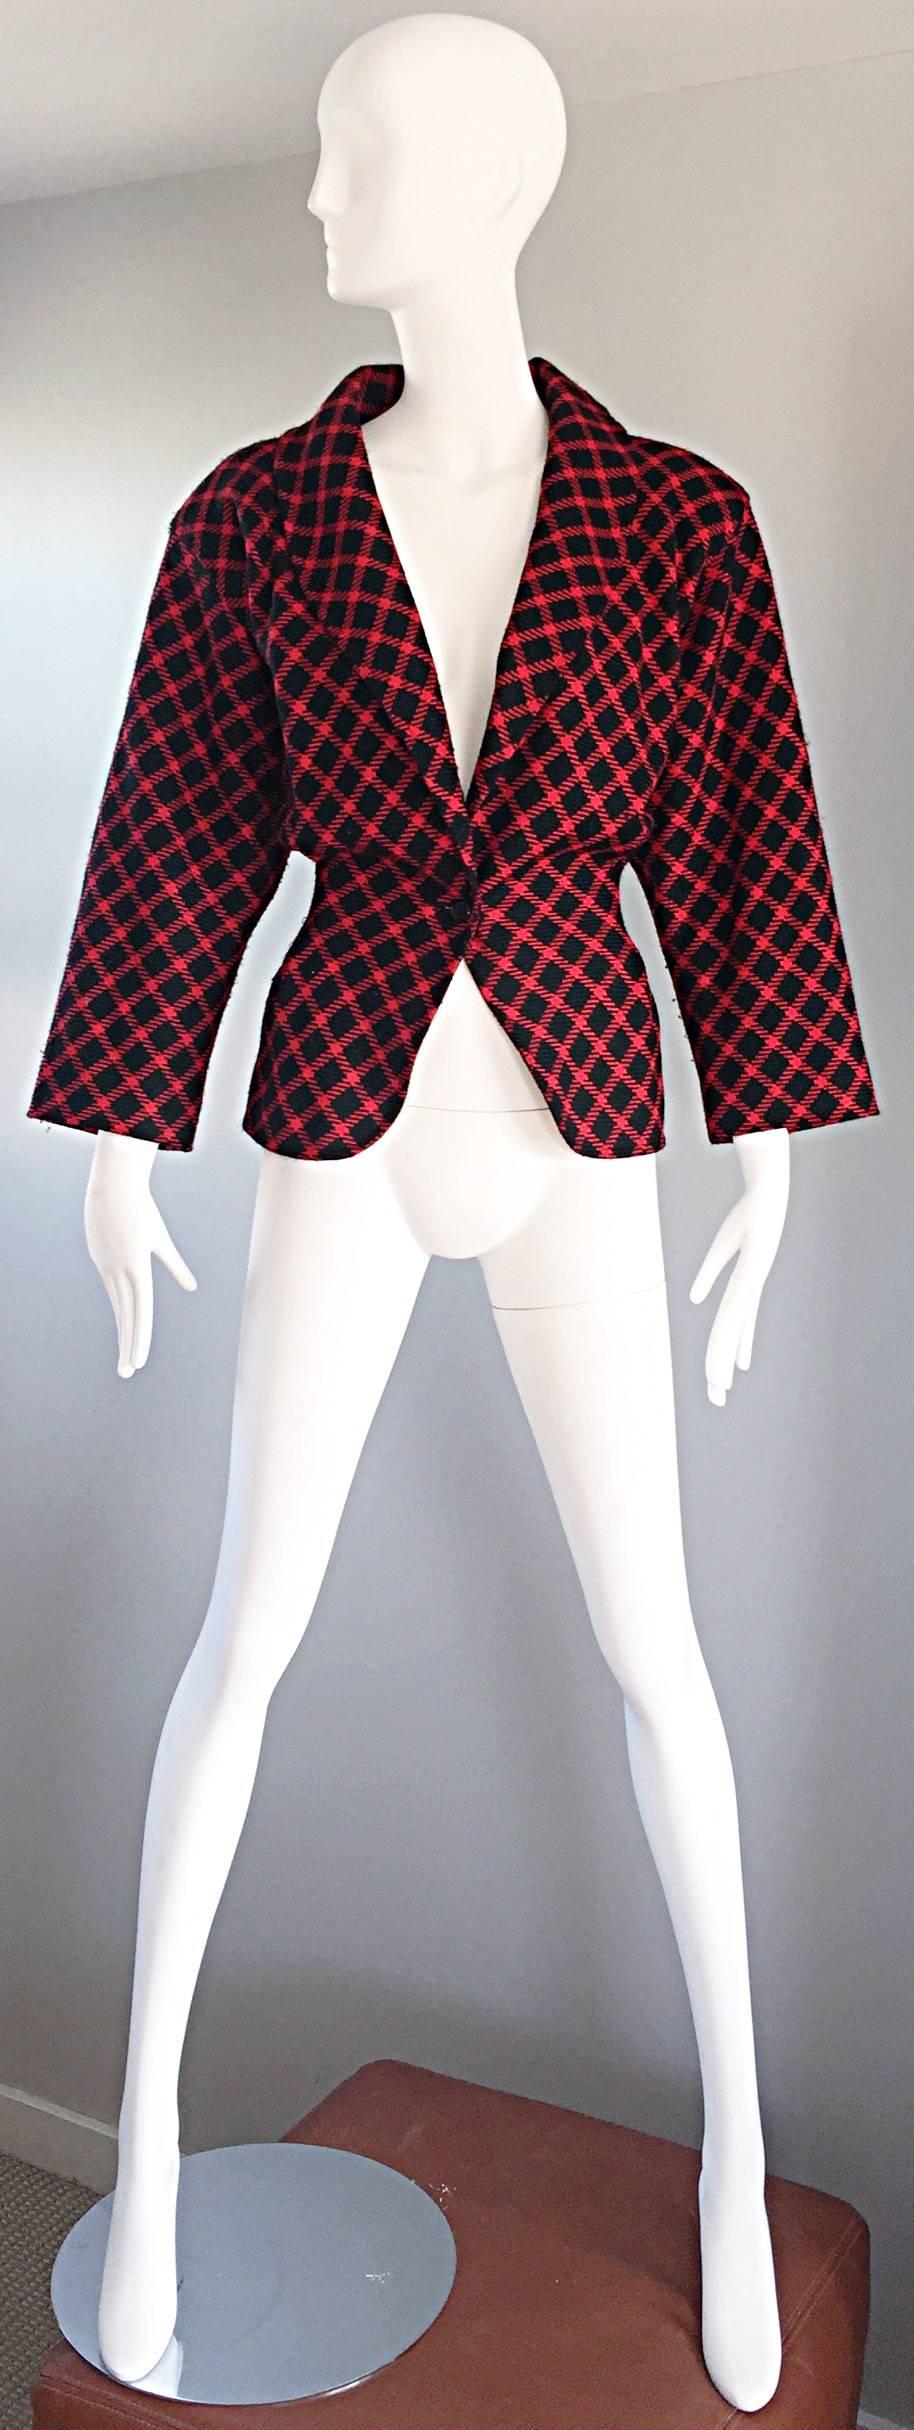 Beautiful vintage EMANUEL UNGARO 80s does 40s black and red plaid wasp waist super soft virgin wool and rayon jacket! Features an allover diamond plaid print. Single button closure at the fitted wasp waist. Shawl collar that can be flipped up or